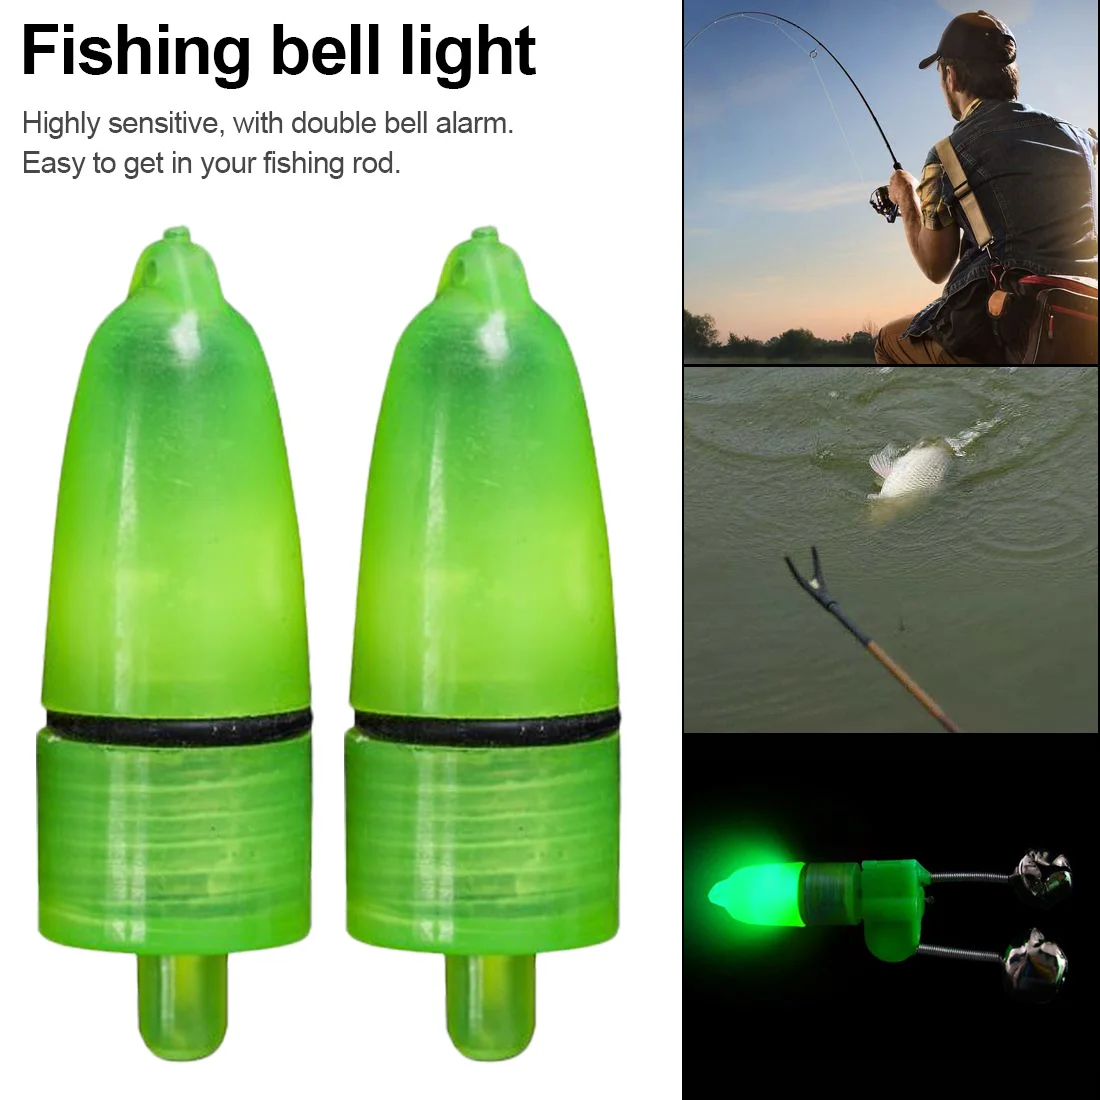 10 PCS Twin Bells Bite Alarm Clip-on for Fishing Rod Outdoo B1A 